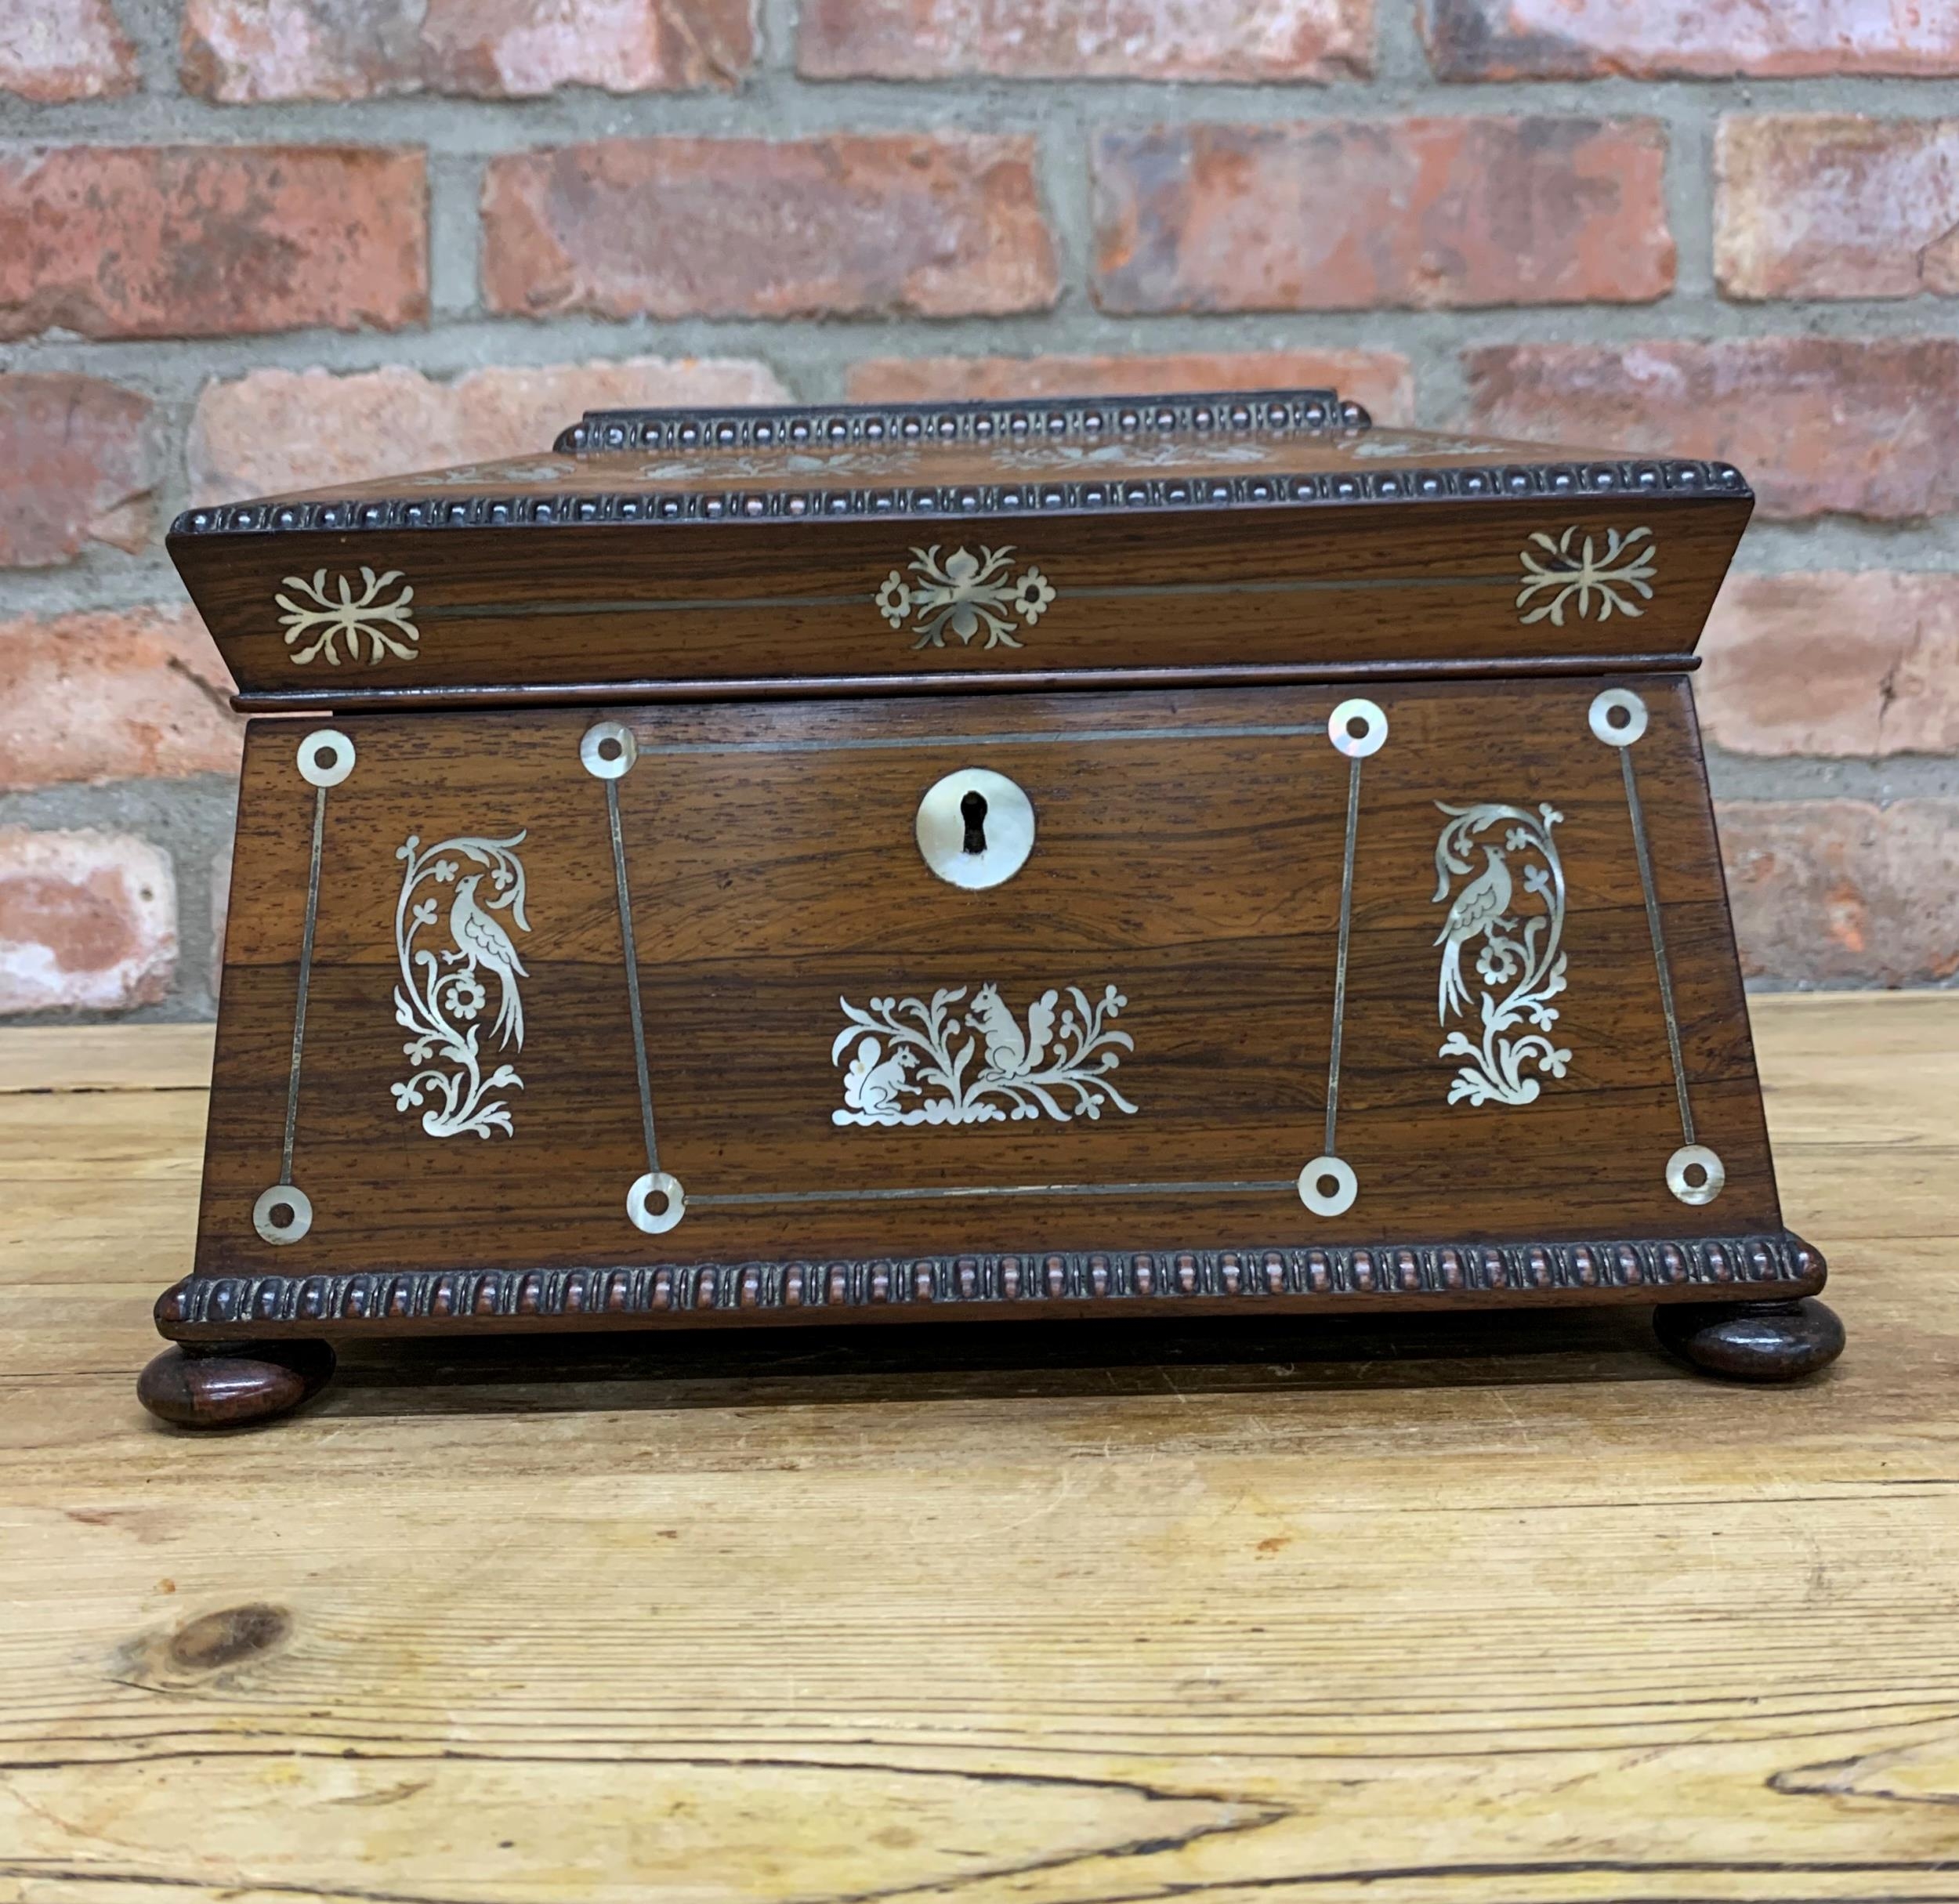 Impressive late Regency rosewood panelled sarcophagus sewing box, having an ornate squirrel and - Image 2 of 5